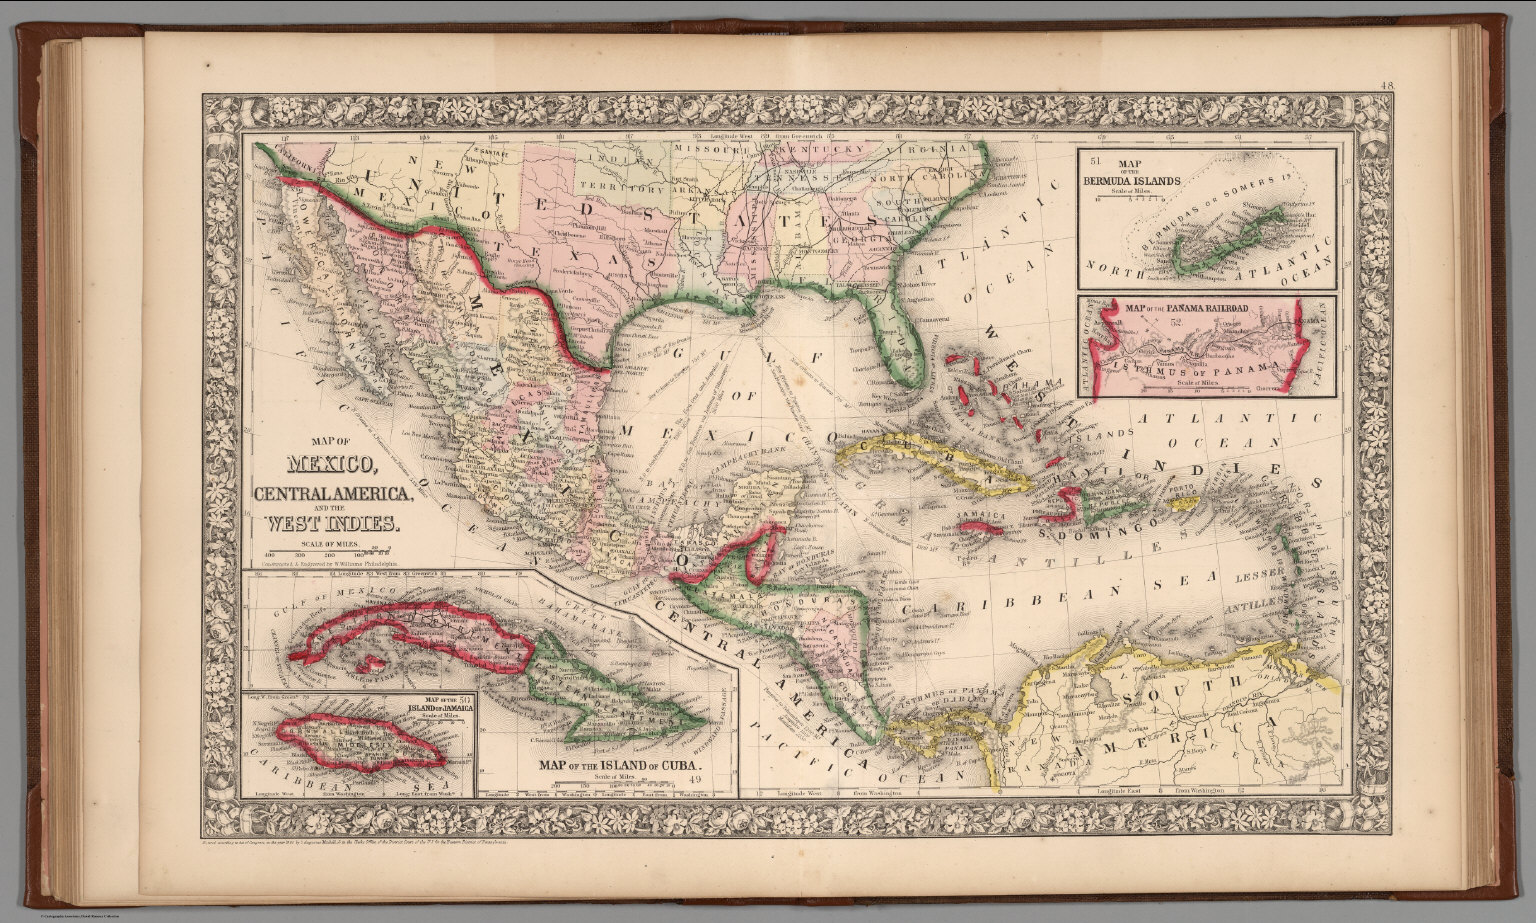 Map Of Mexico Central America And The West Indies David Rumsey Historical Map Collection 1341